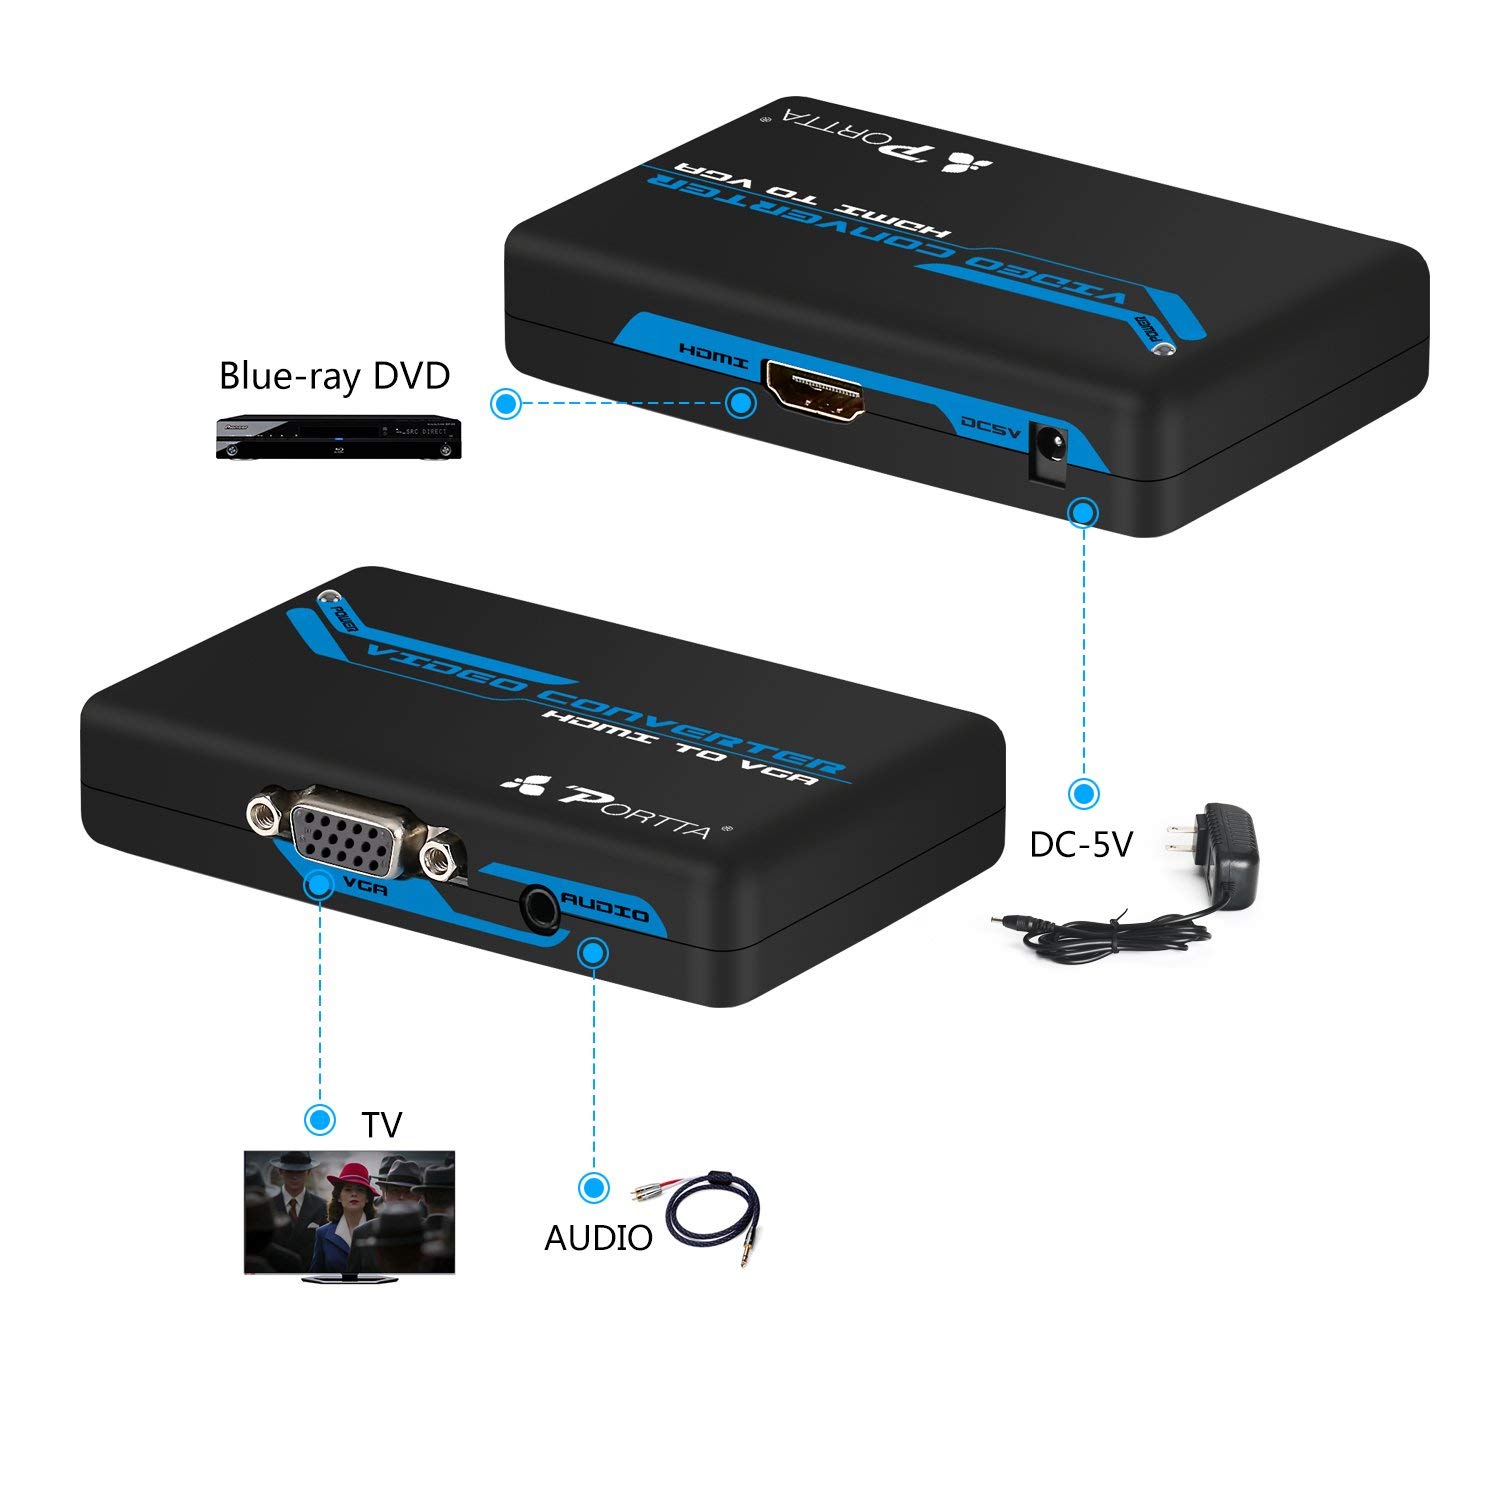 How to connect a VGA Projector or monitor to an HDMI port - 2